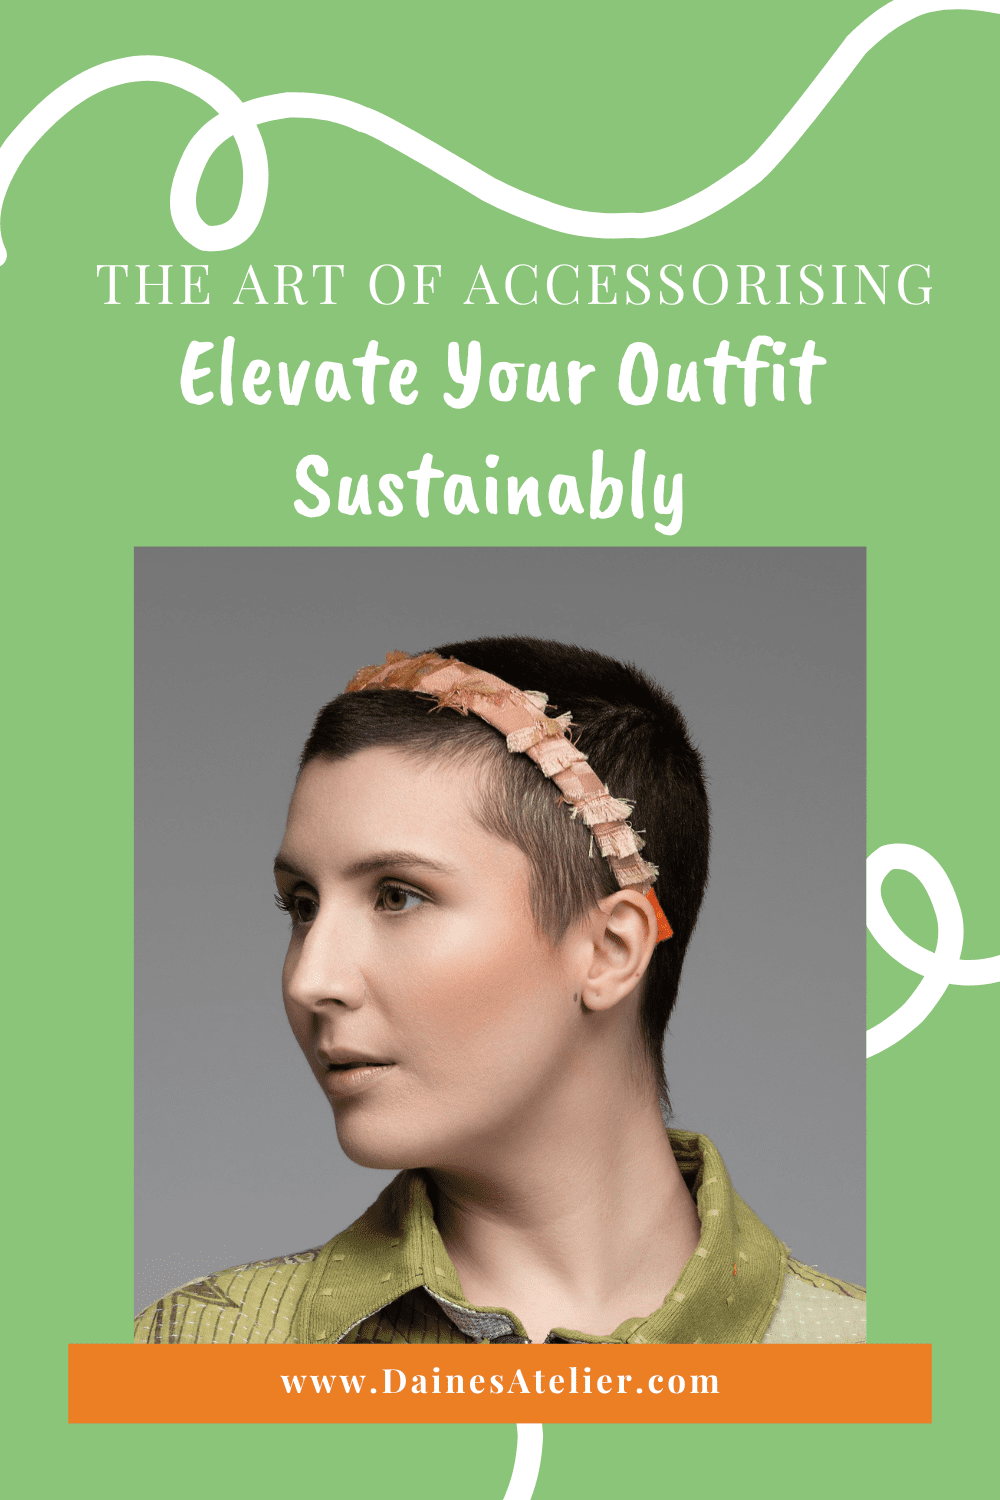 The Art of Accessorising – Elevate Your Outfit Sustainably